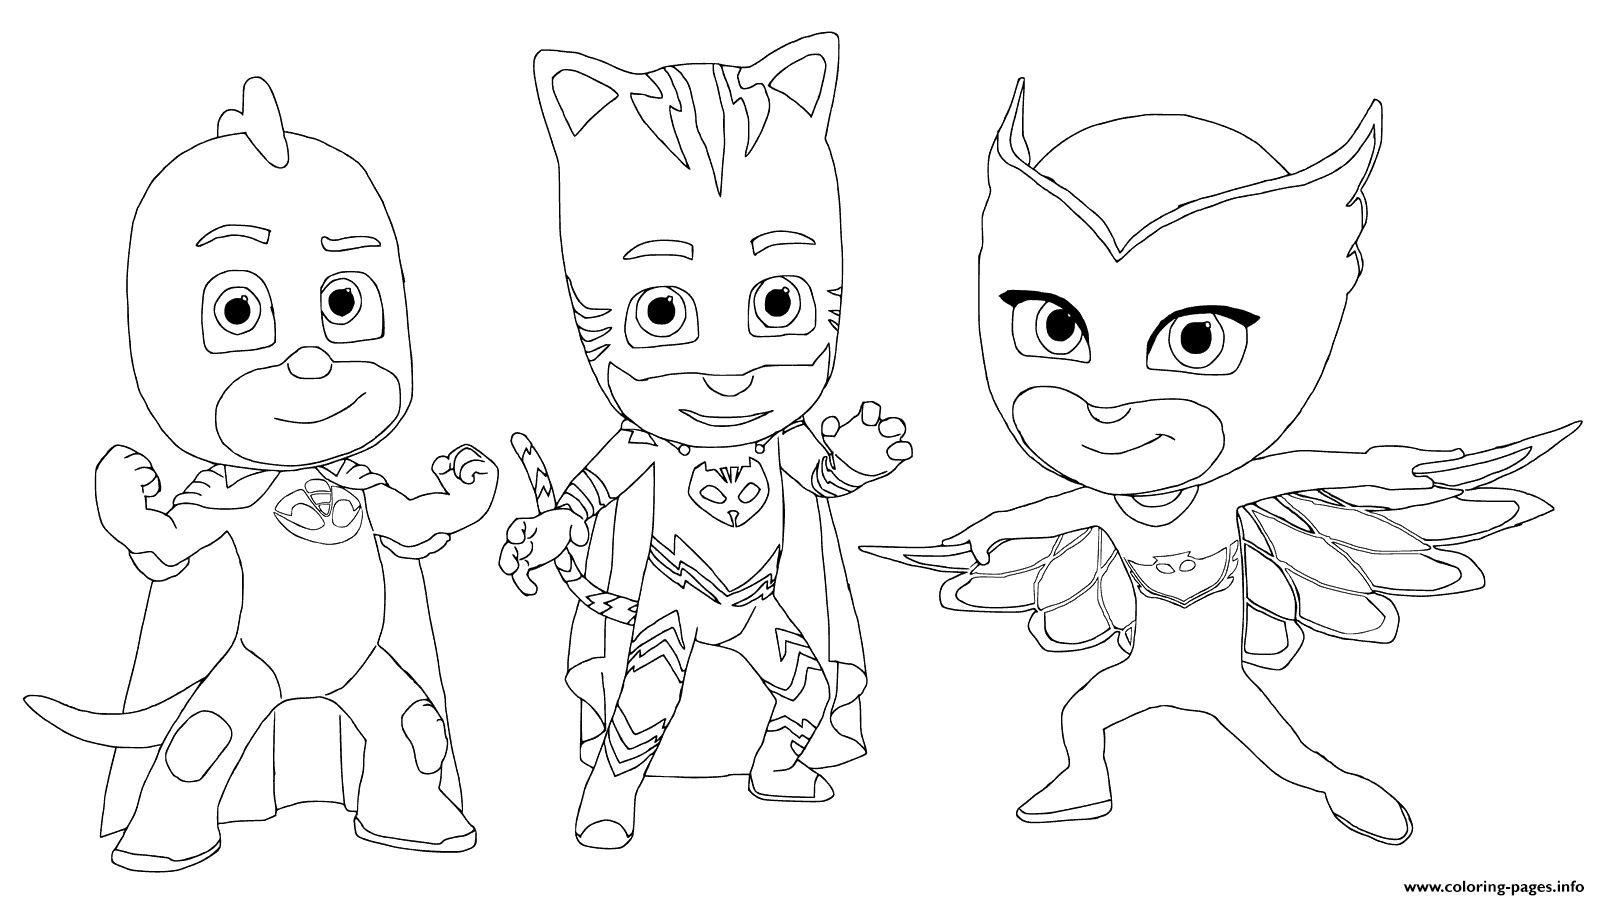 Pj masks with friends coloring page printable